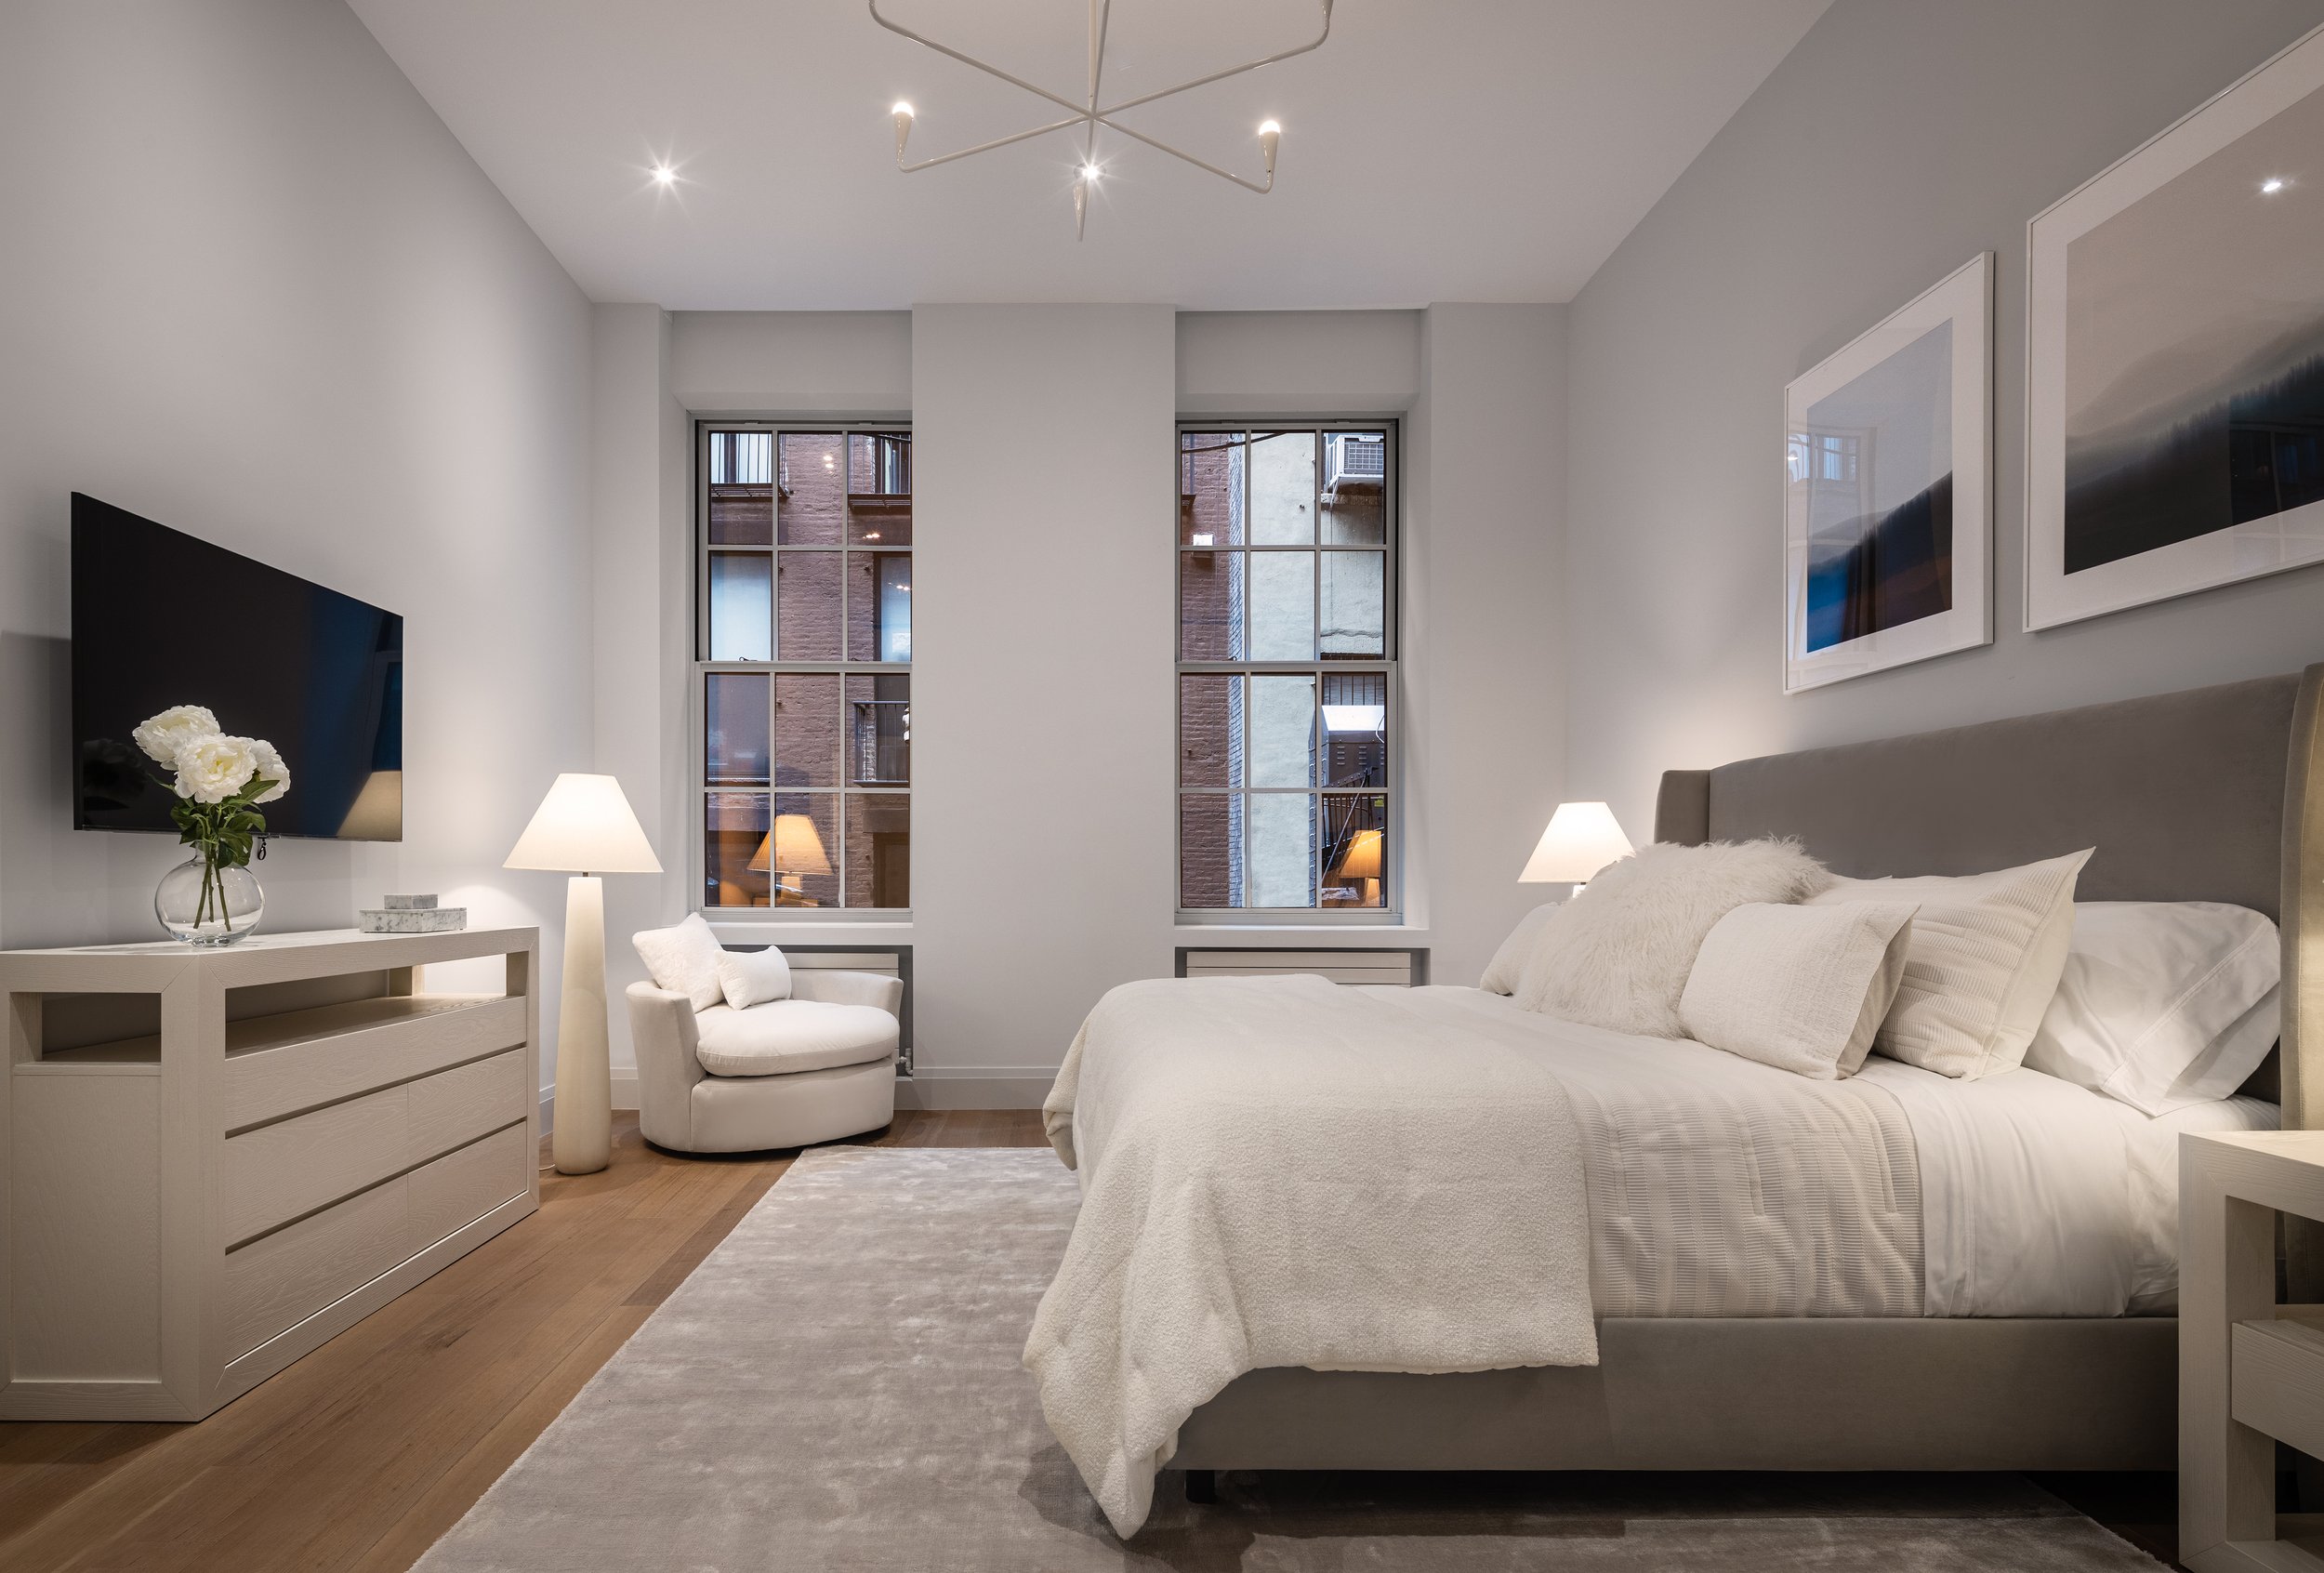  After many years of meticulous restoration and conversion to condominium residences, the landmarked Tribeca property,   66 Reade  , has officially launched sales. Originally designed by Samuel A. Warner and completed in the mid-1800’s, the boutique 